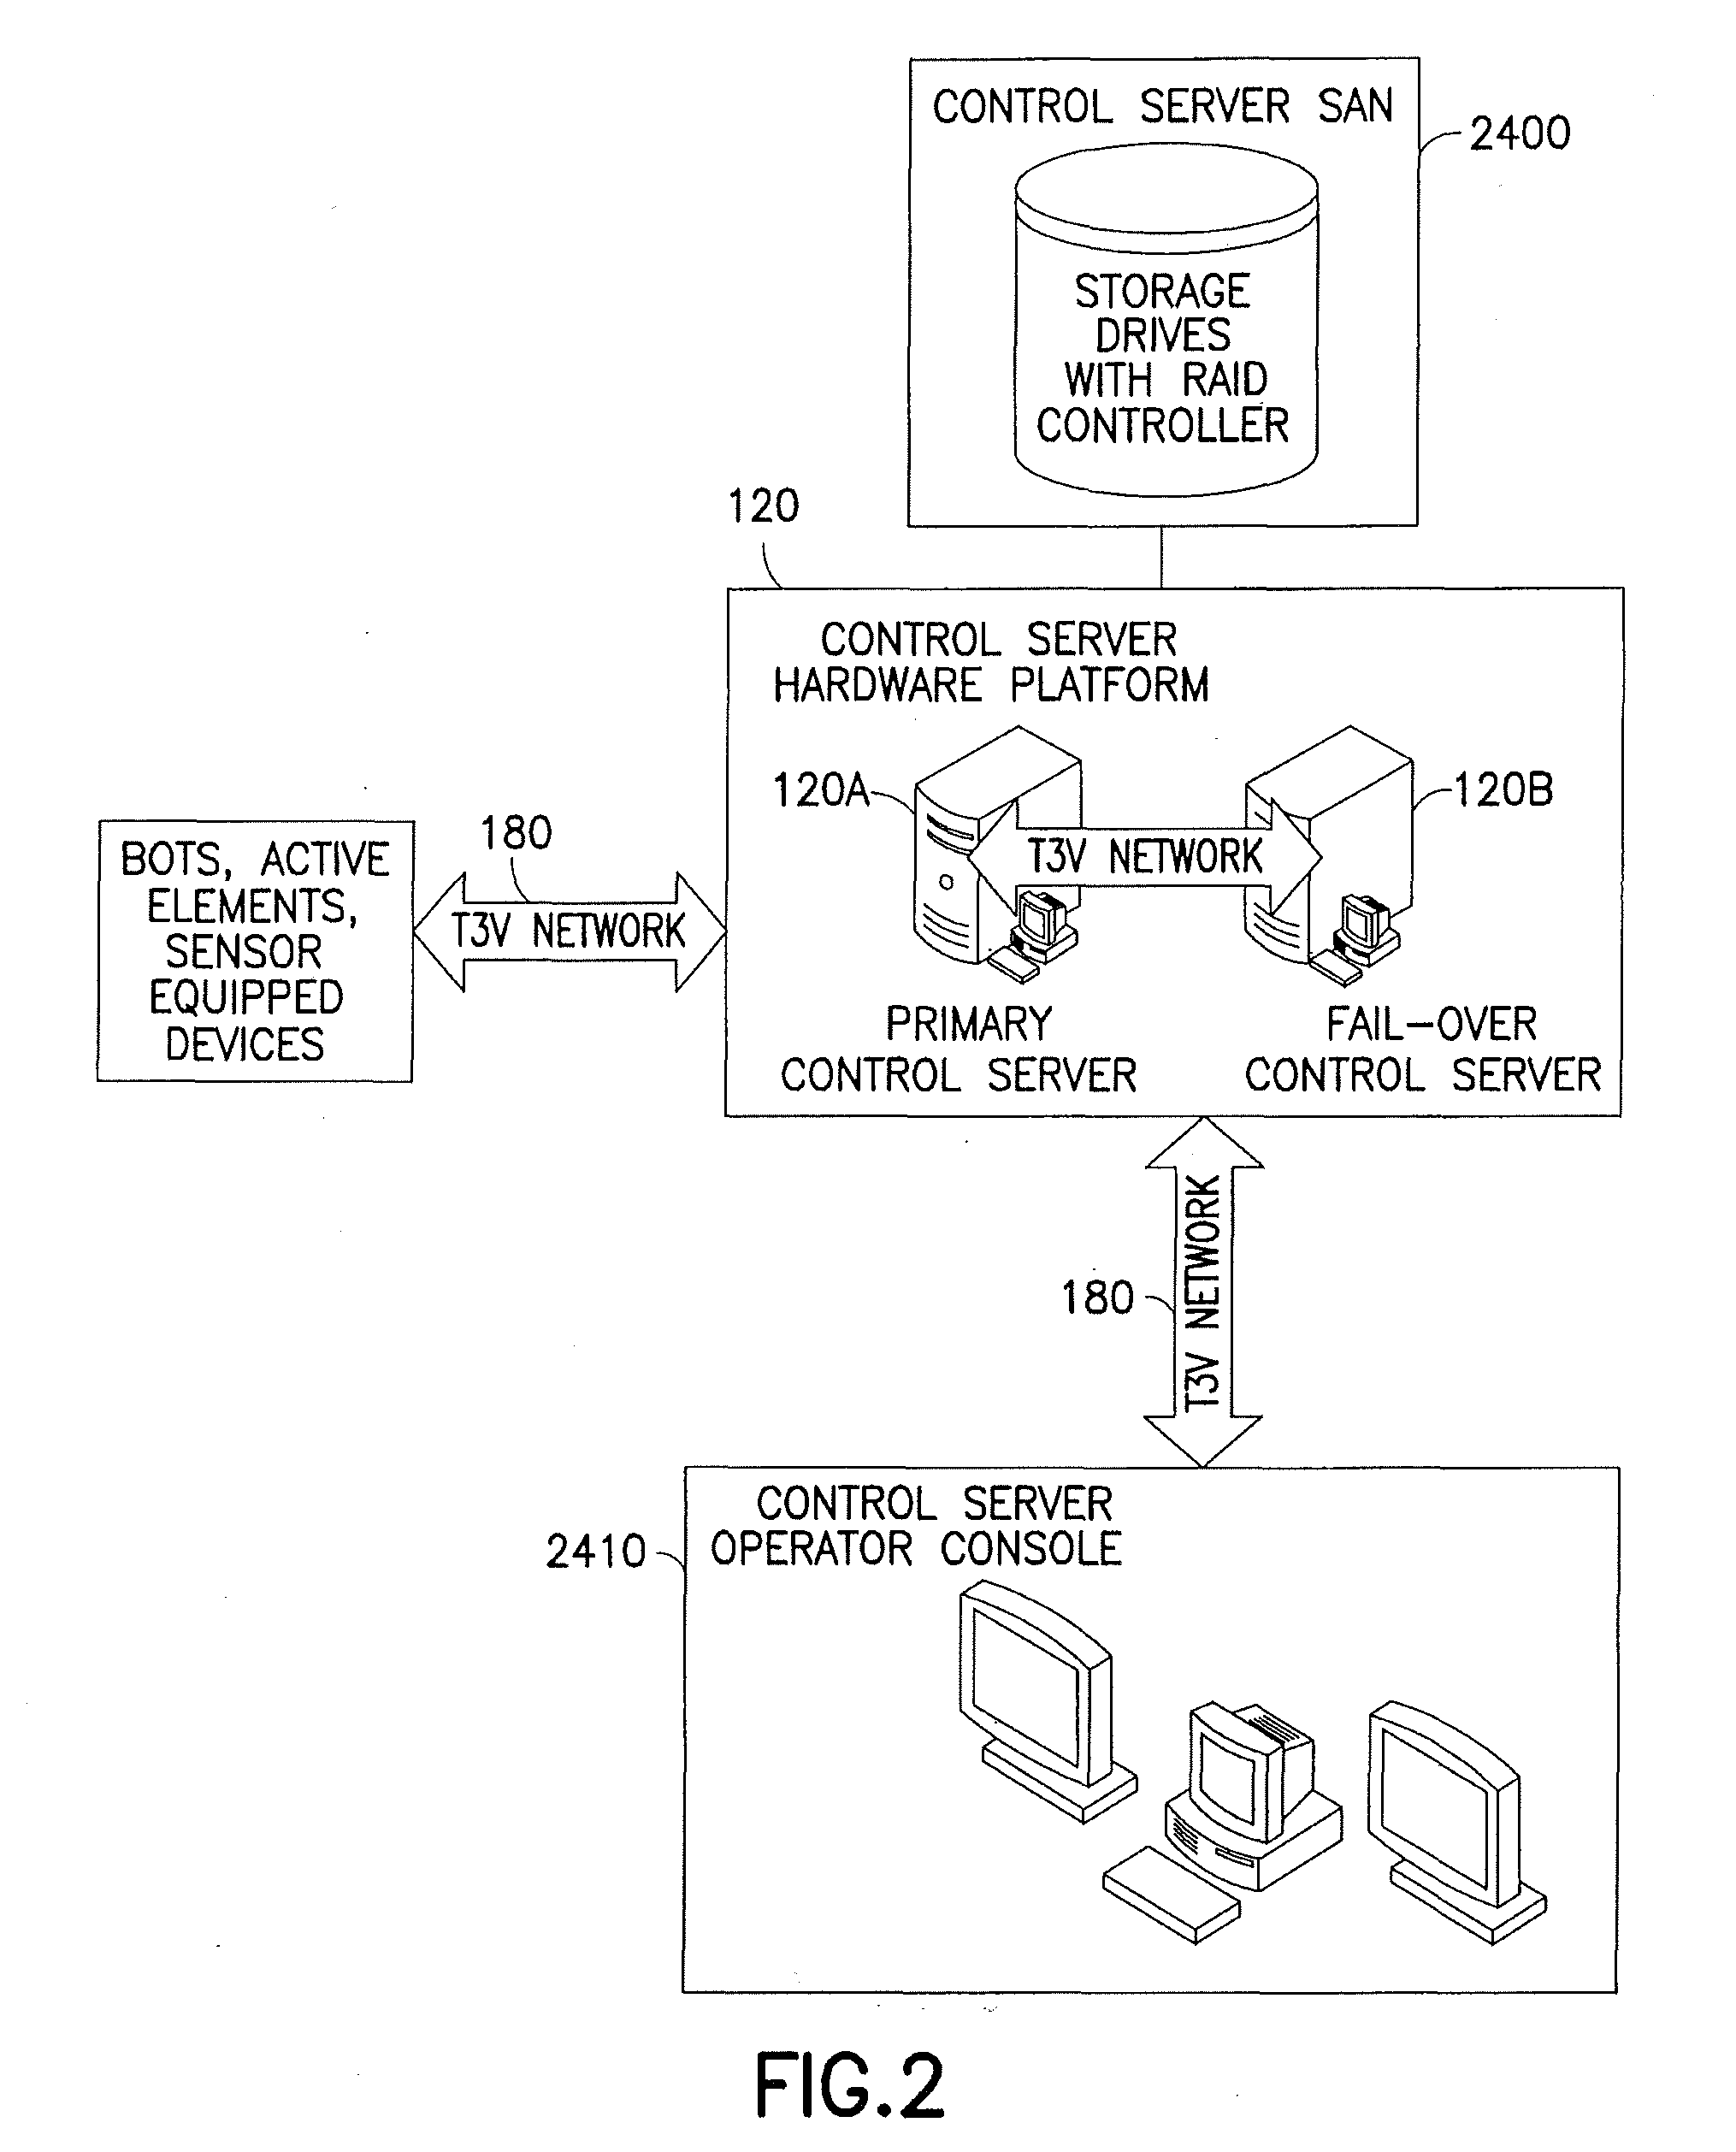 Control system for storage and retrieval systems